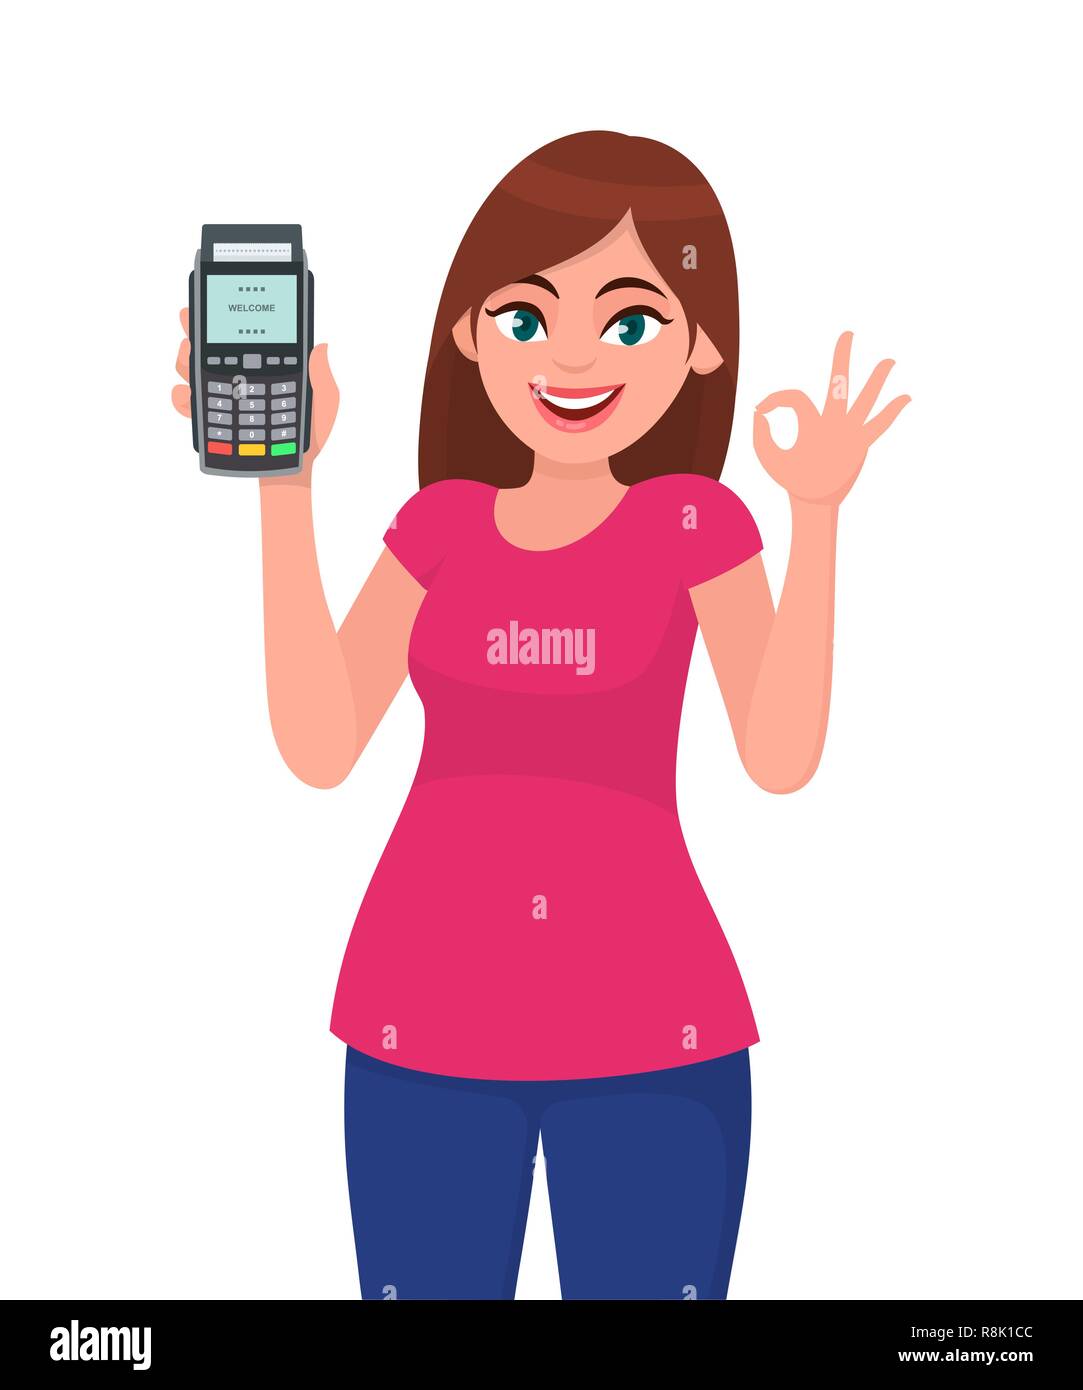 Pretty happy young woman showing/holding pos payment terminal or credit/debit cards swiping machine, gesturing okay/OK sign. Wireless modern bank paym Stock Vector